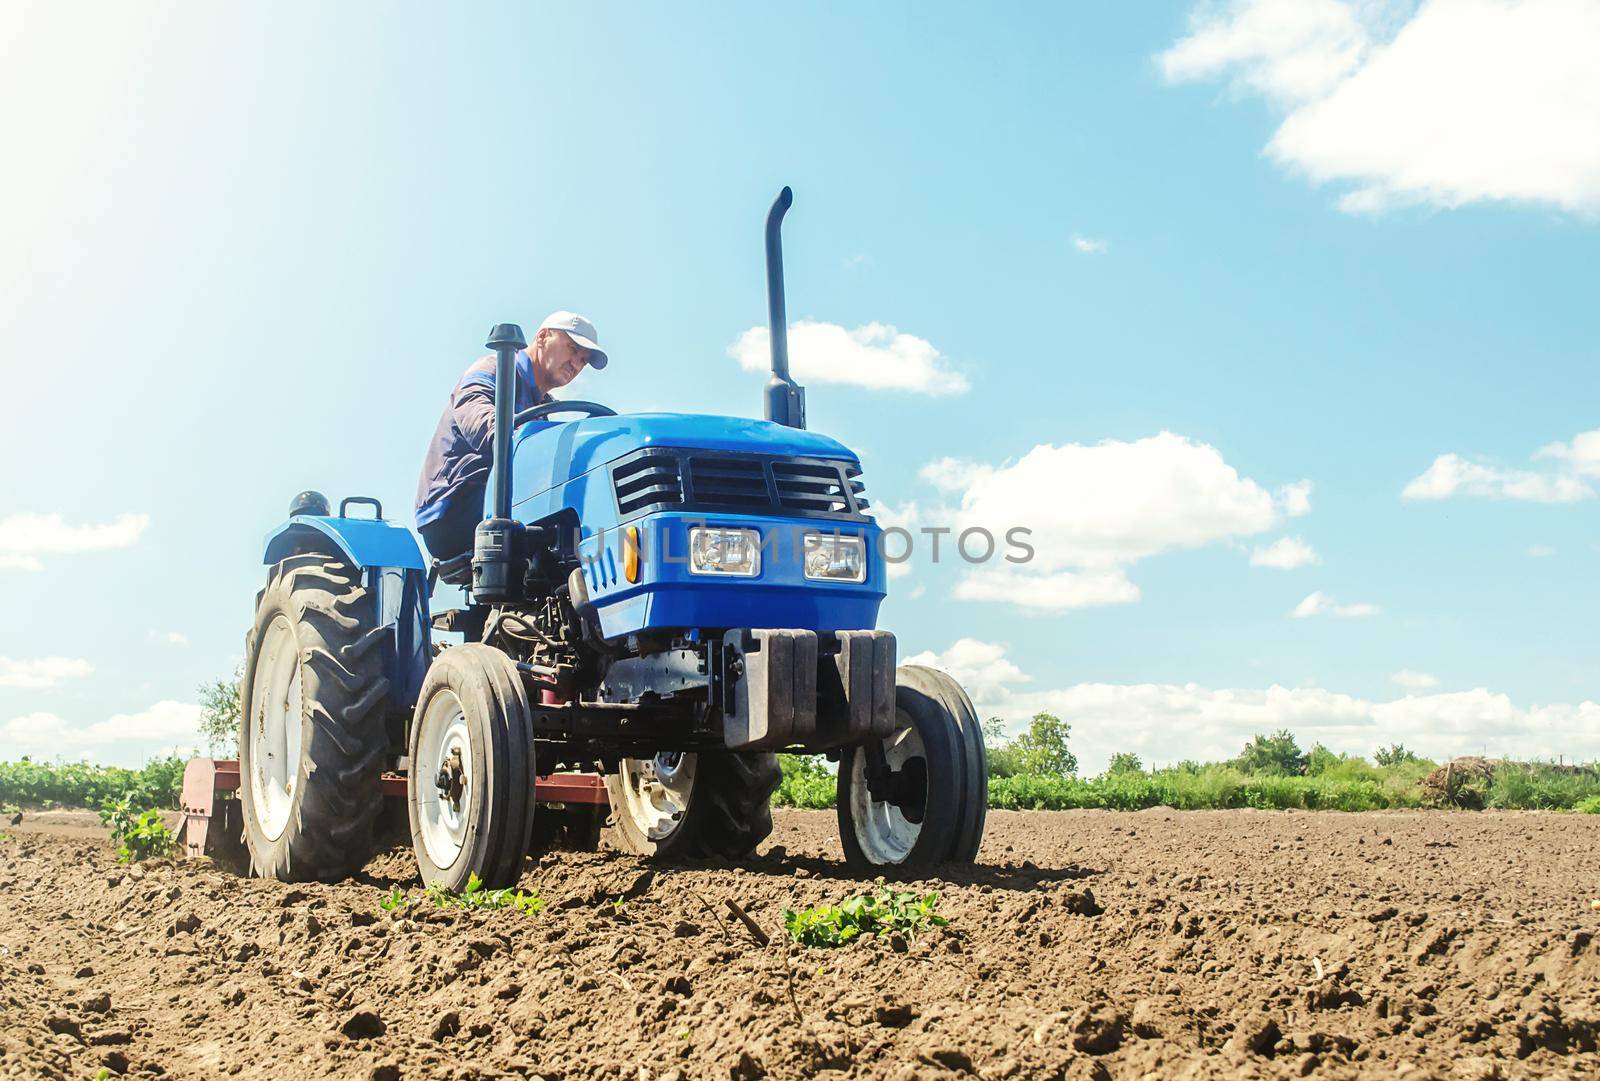 The farmer works on a tractor. Loosening the surface, cultivating the land for further planting. Grinding and loosening soil, removing plants roots from last harvest. Cultivation technology equipment.